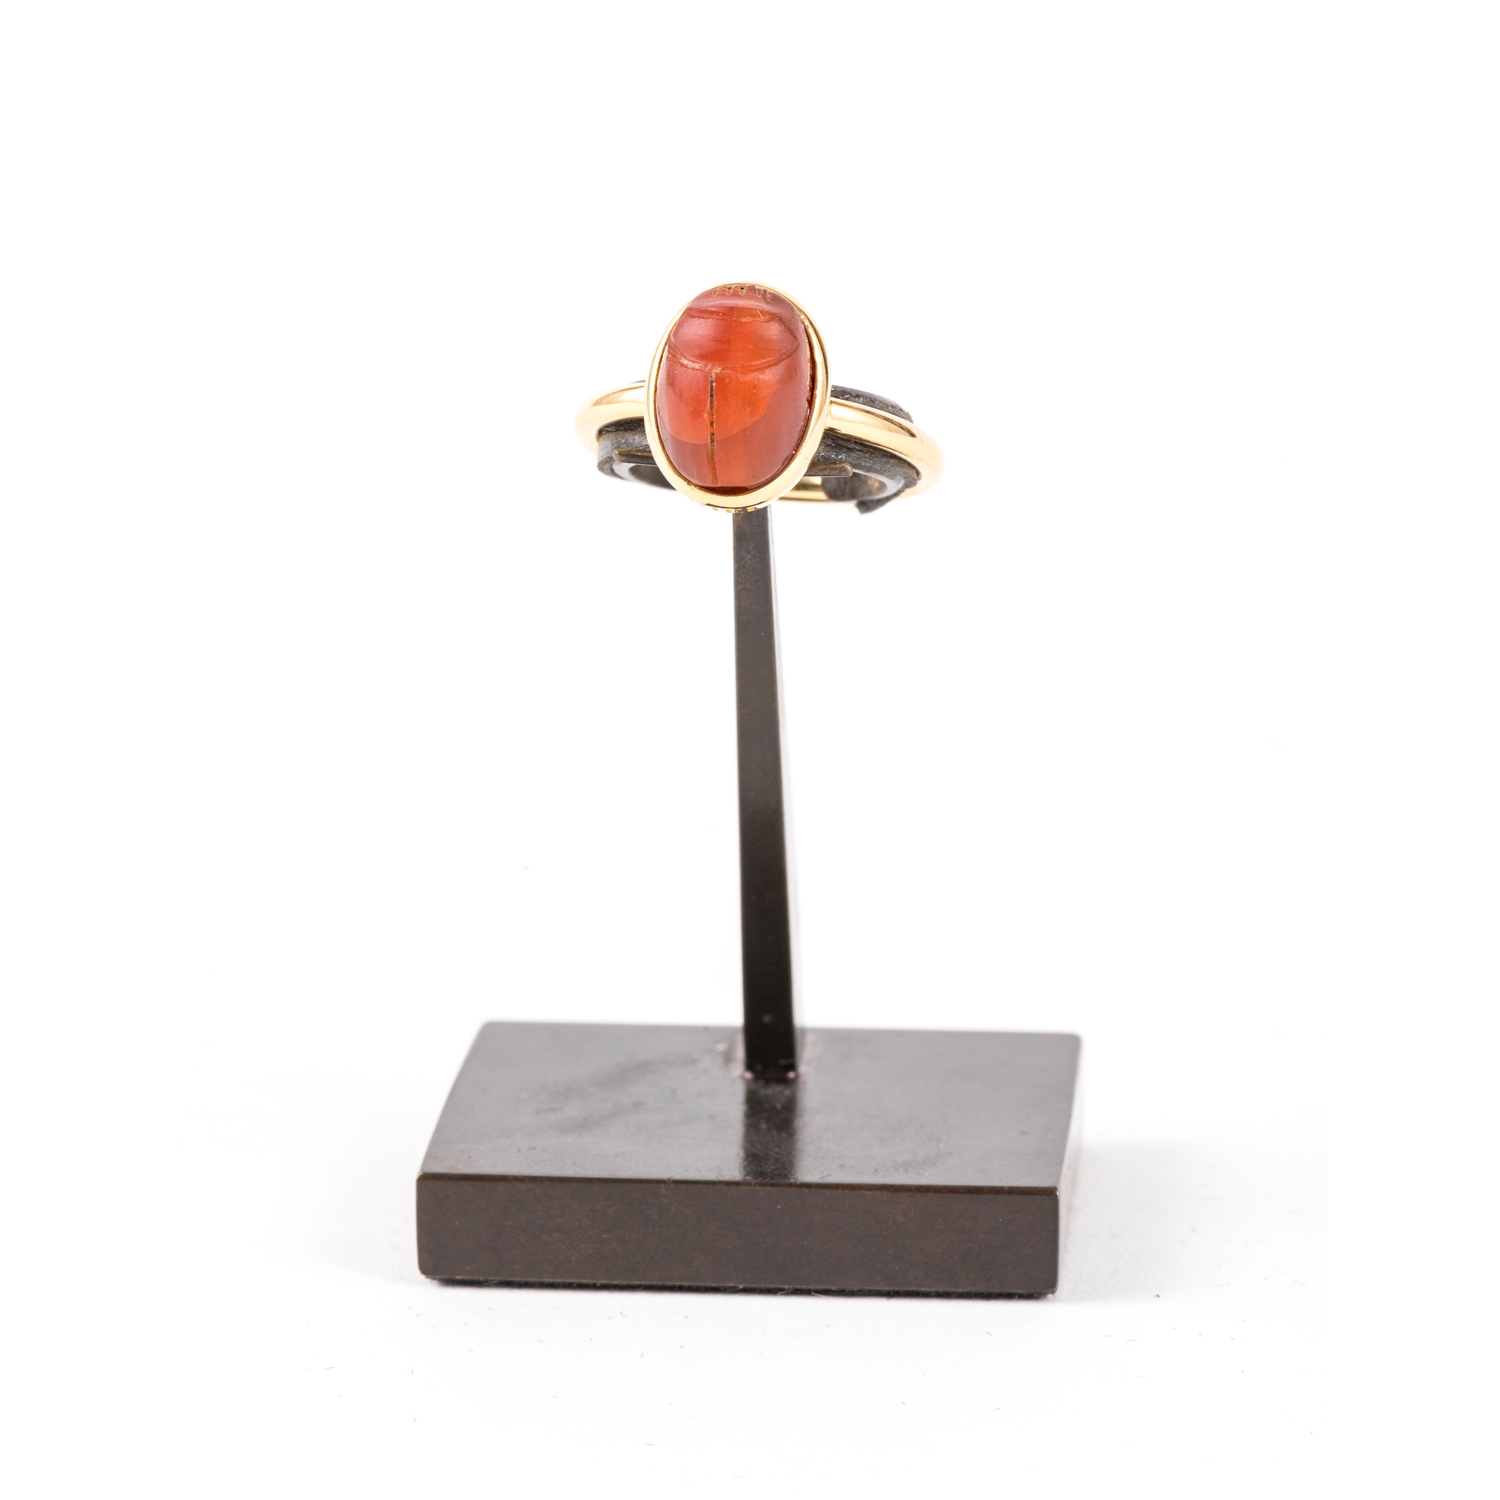 UNIQUE RING WITH A DYNASTIC EGYPTIAN CARNELIAN SCARAB 